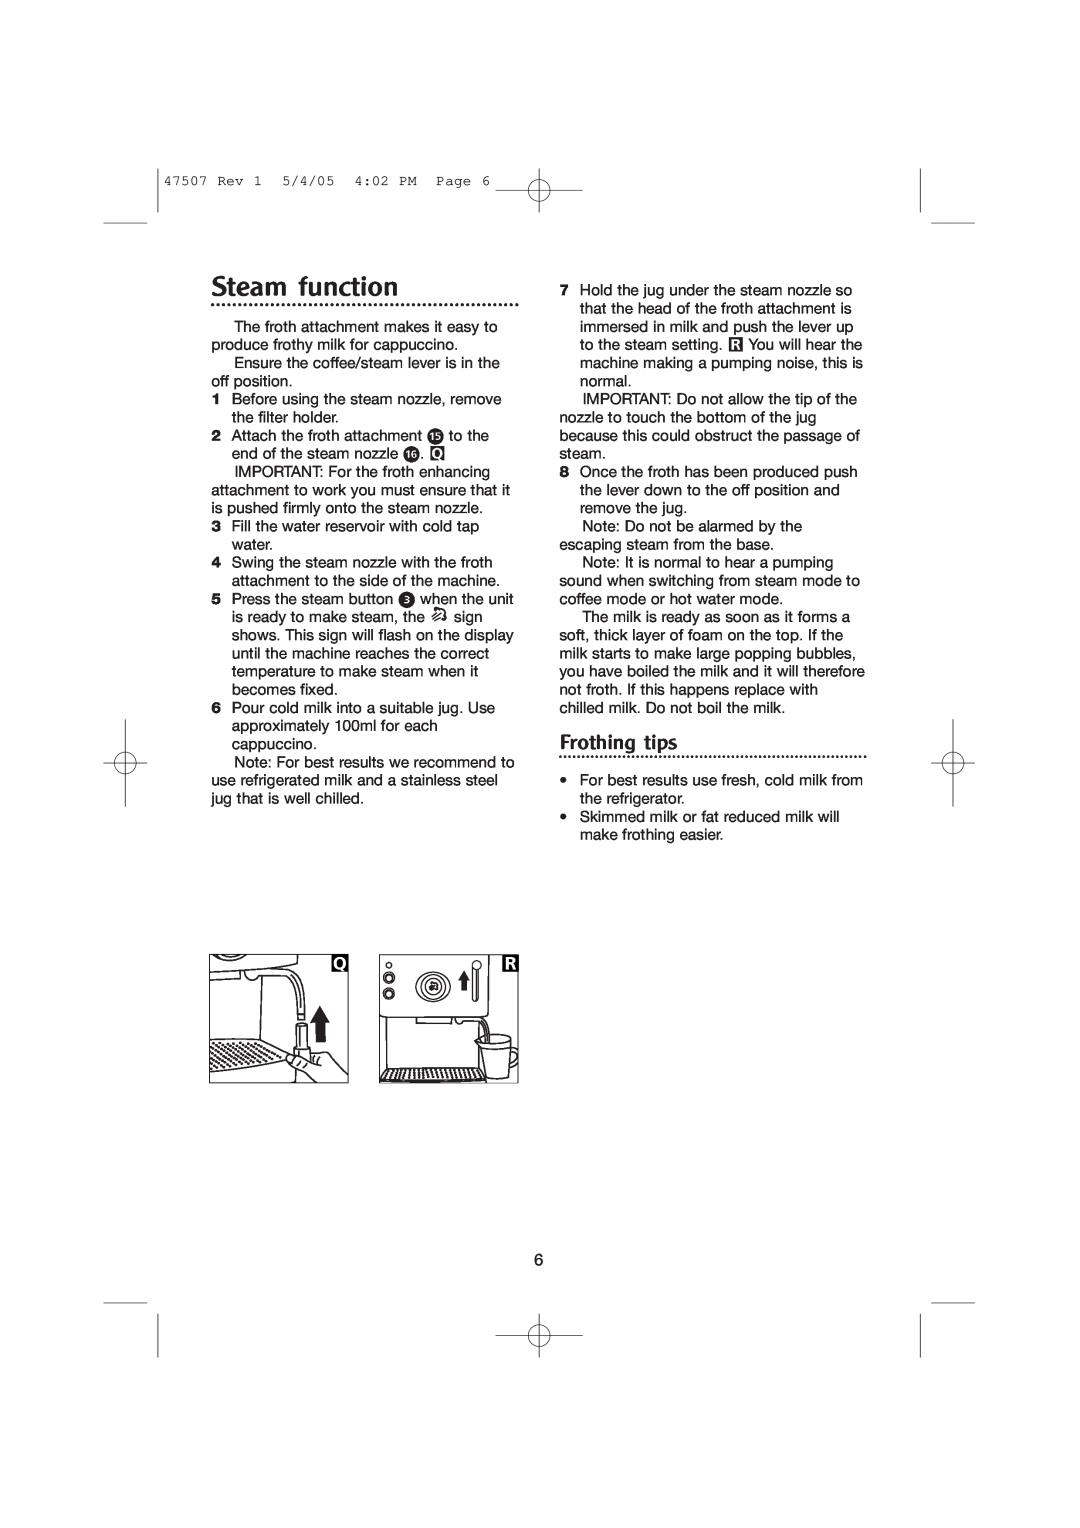 Morphy Richards CoffeMaker manual Steam function, Frothing tips 